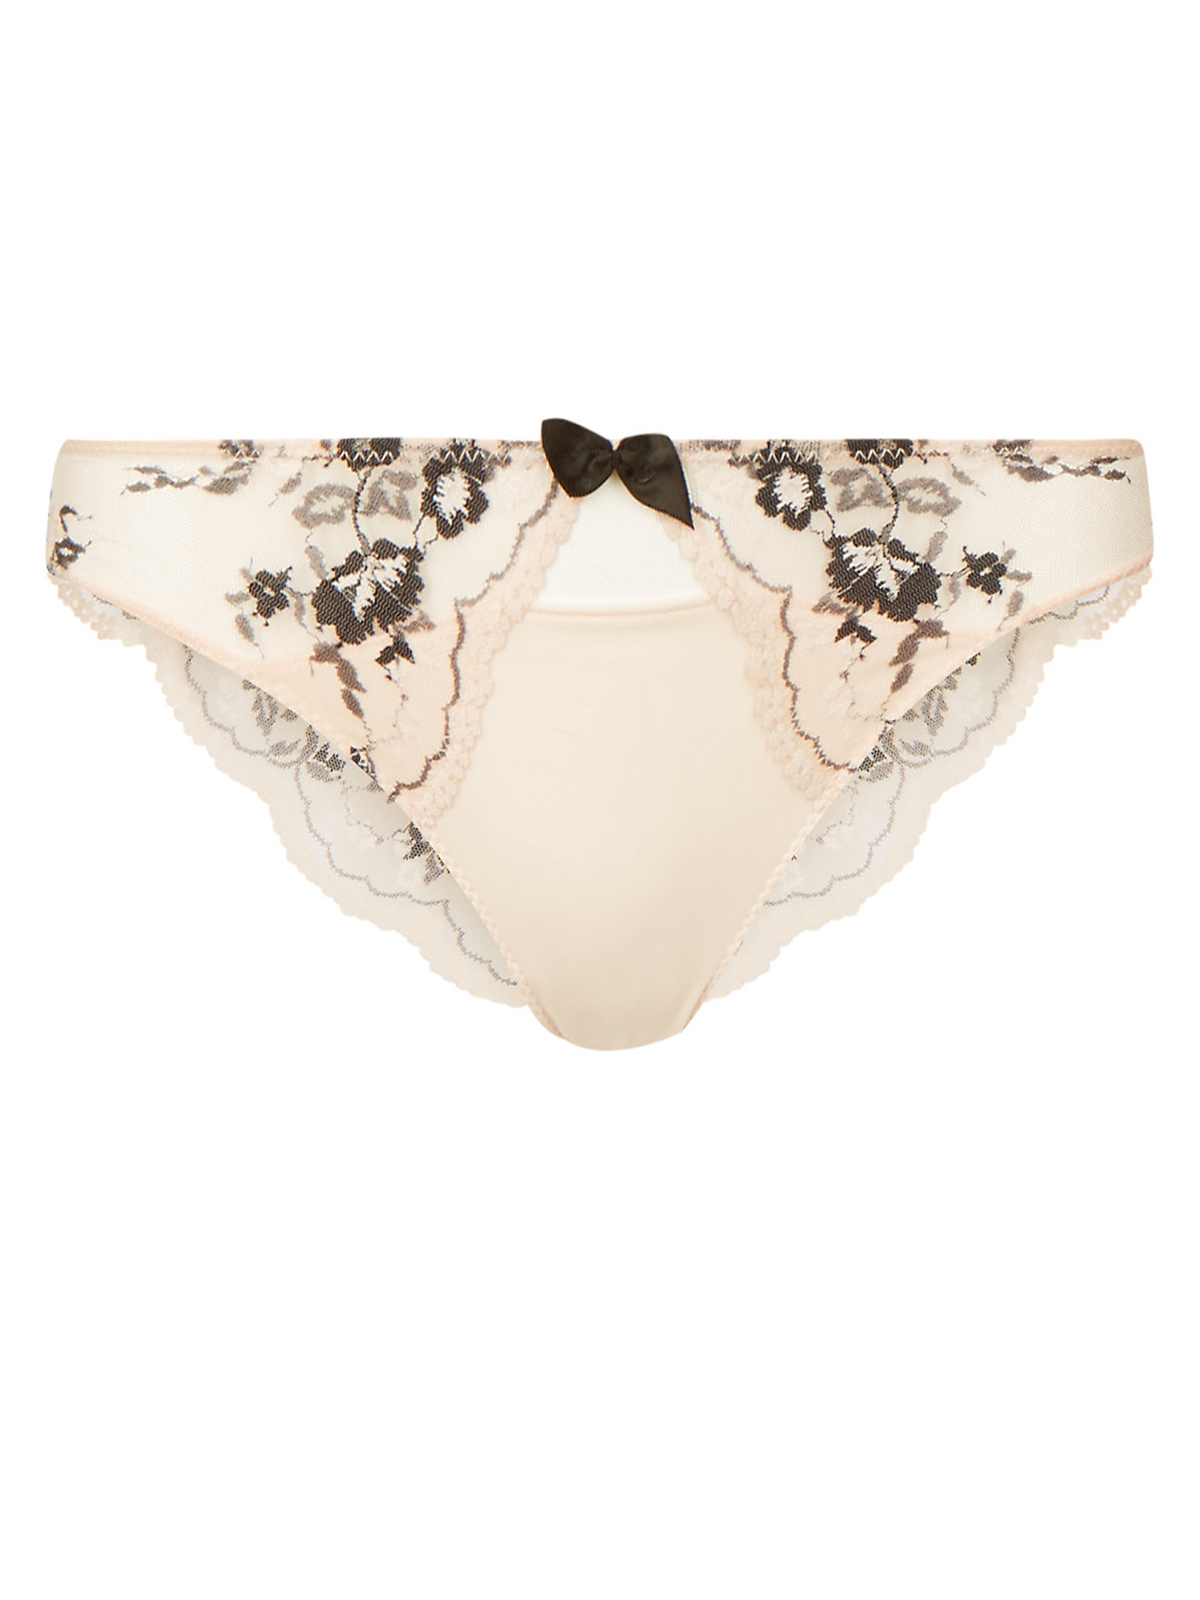 Marks and Spencer - - M&5 PALE-ROSE Peekaboo Lace Brazilian Knickers ...